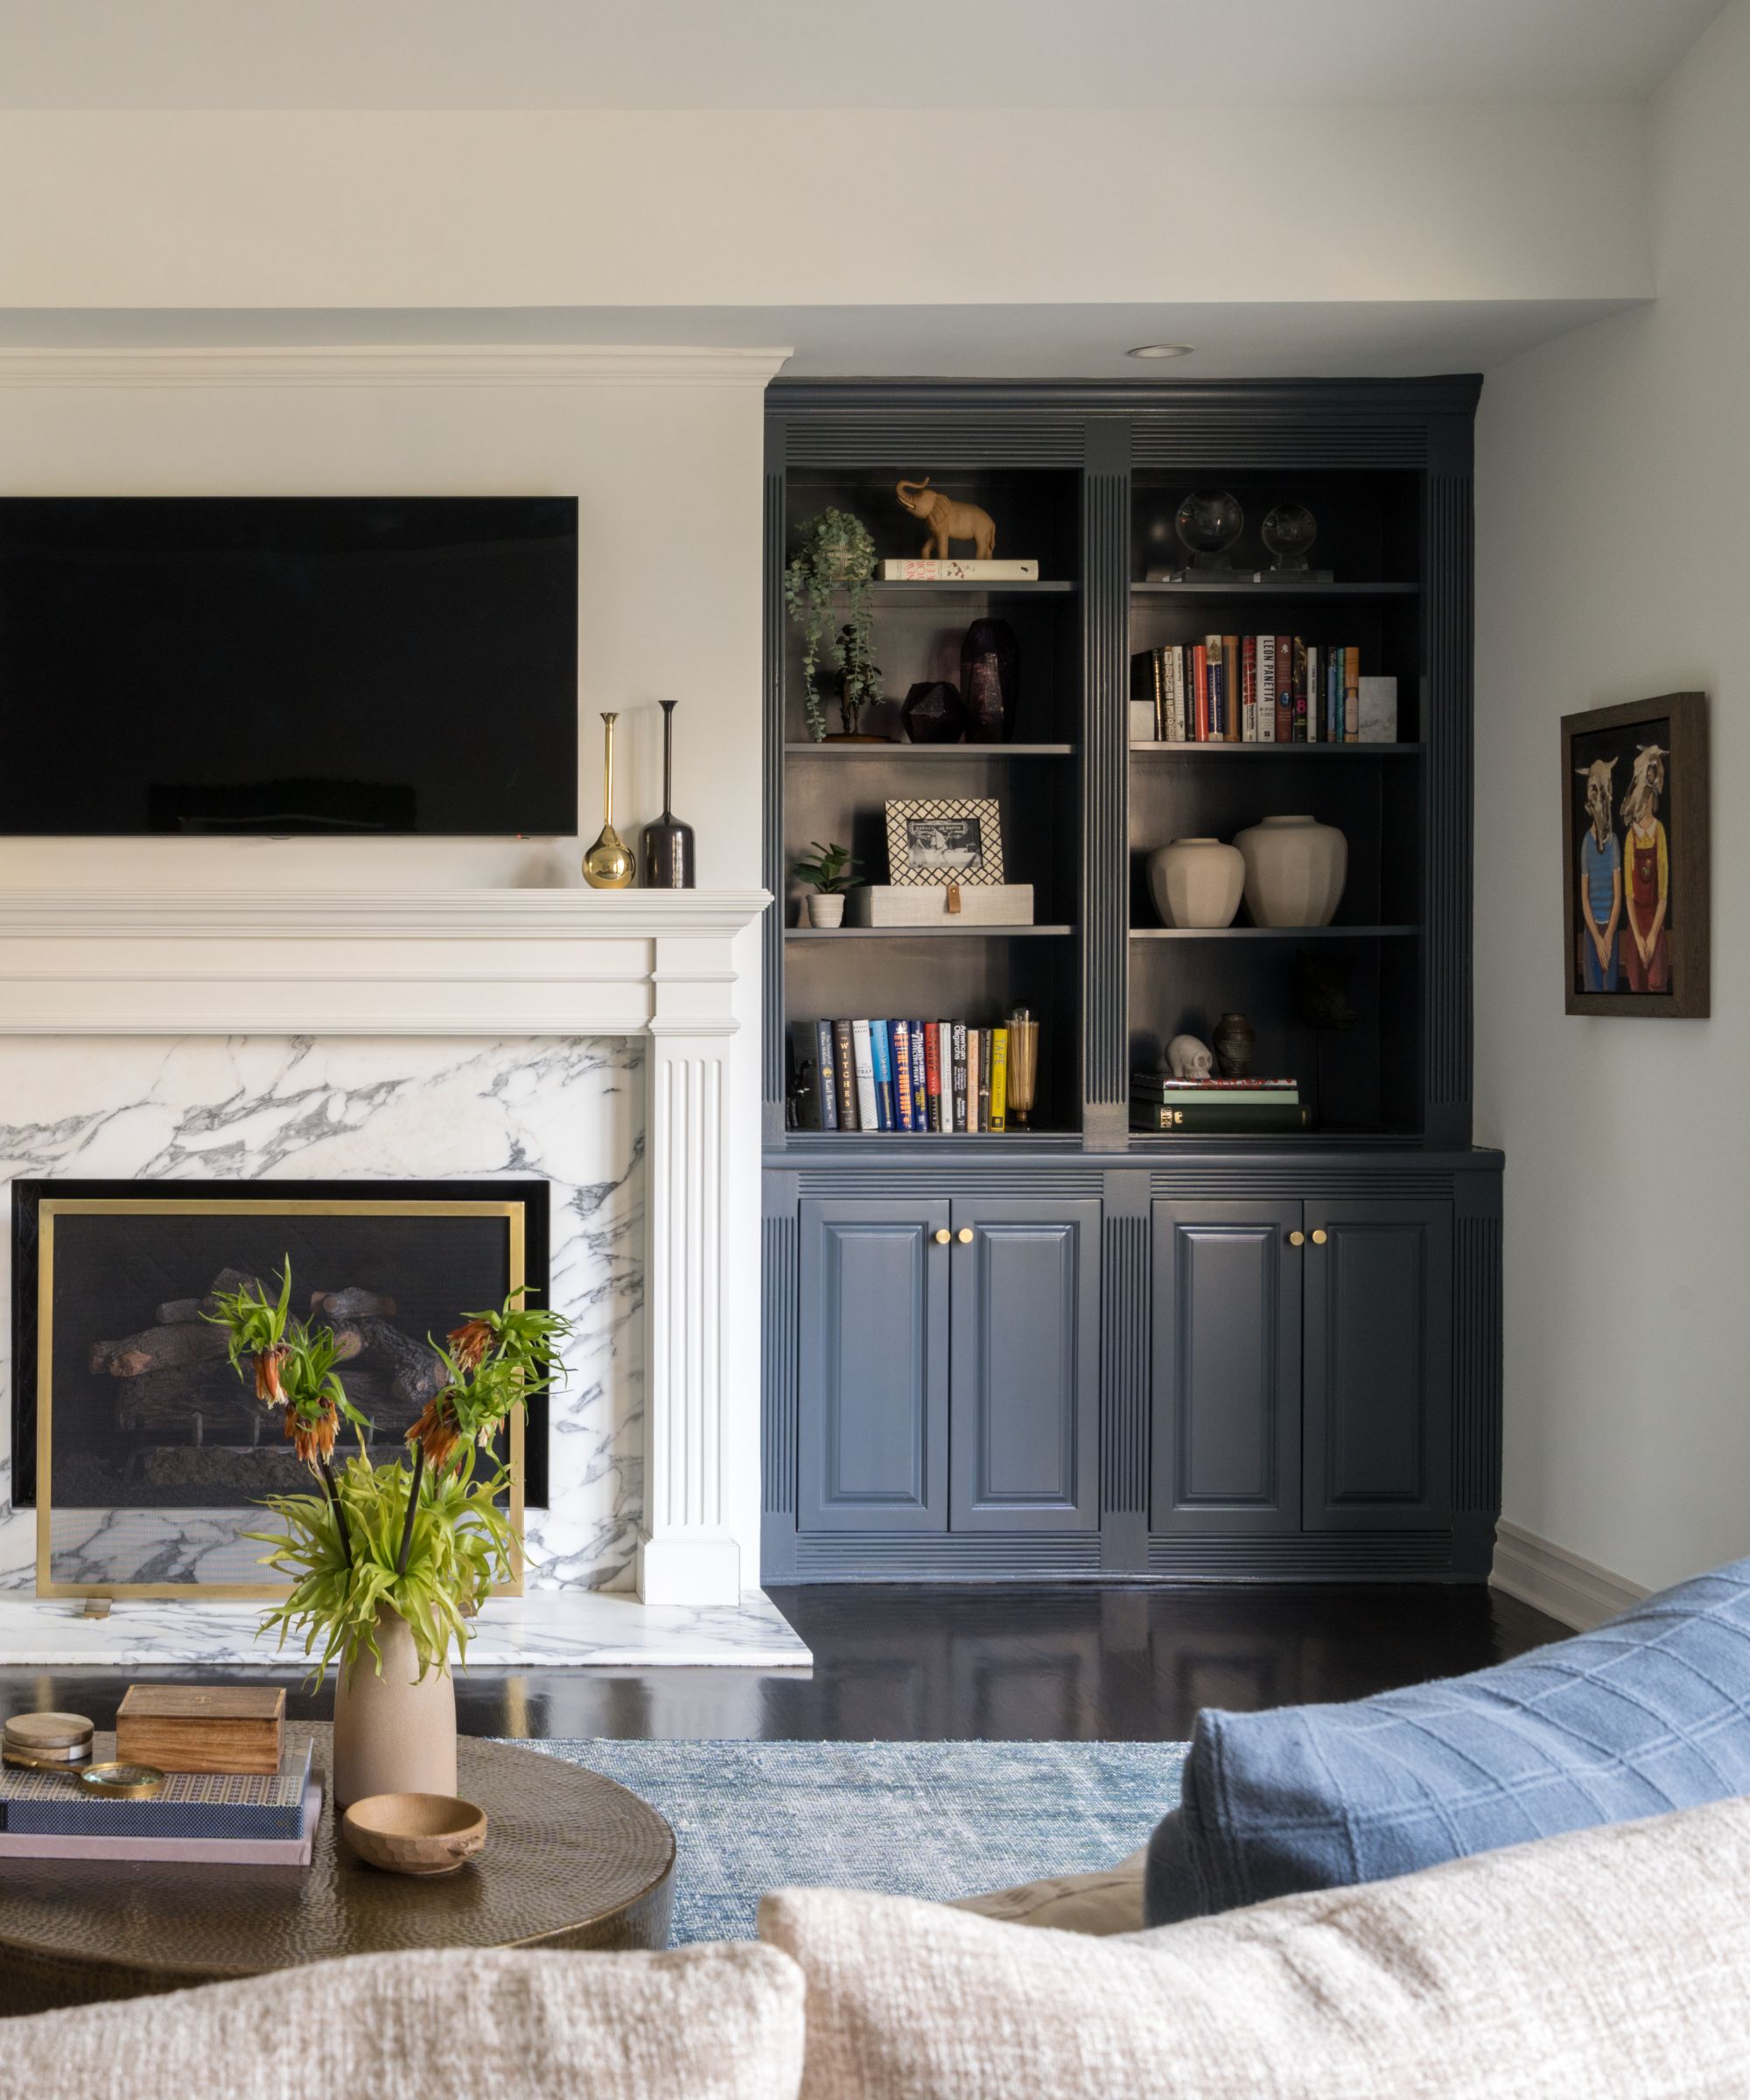 A living room with a white marble fireplace and dark blue bookshelves